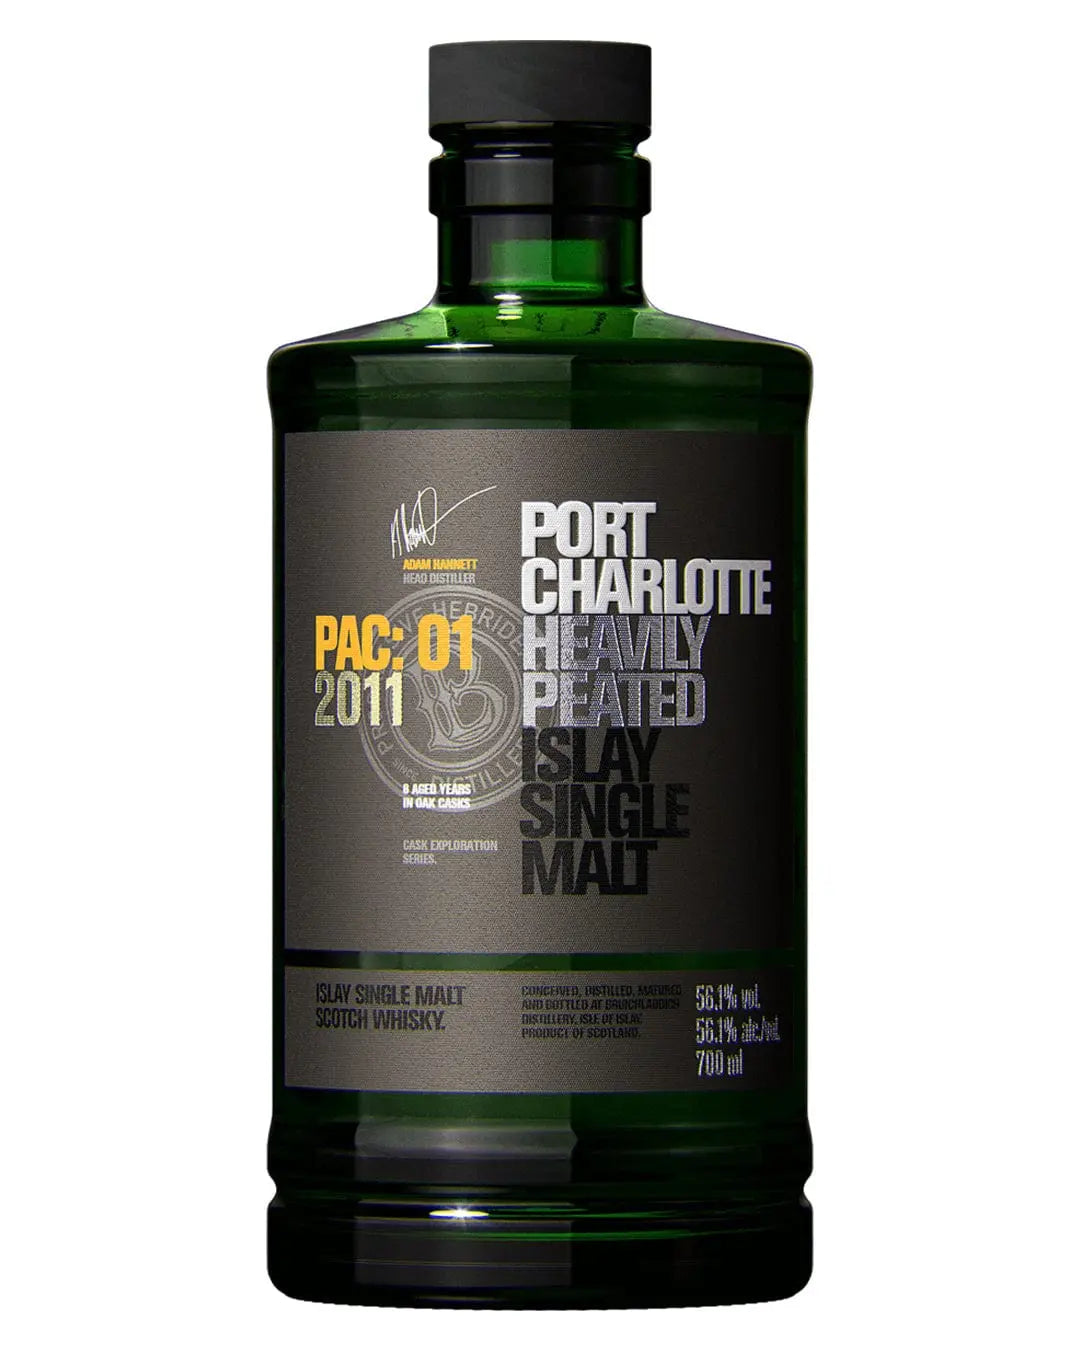 Bruichladdich Port Charlotte PAC: 01 2011 Whisky, 70 cl Whisky